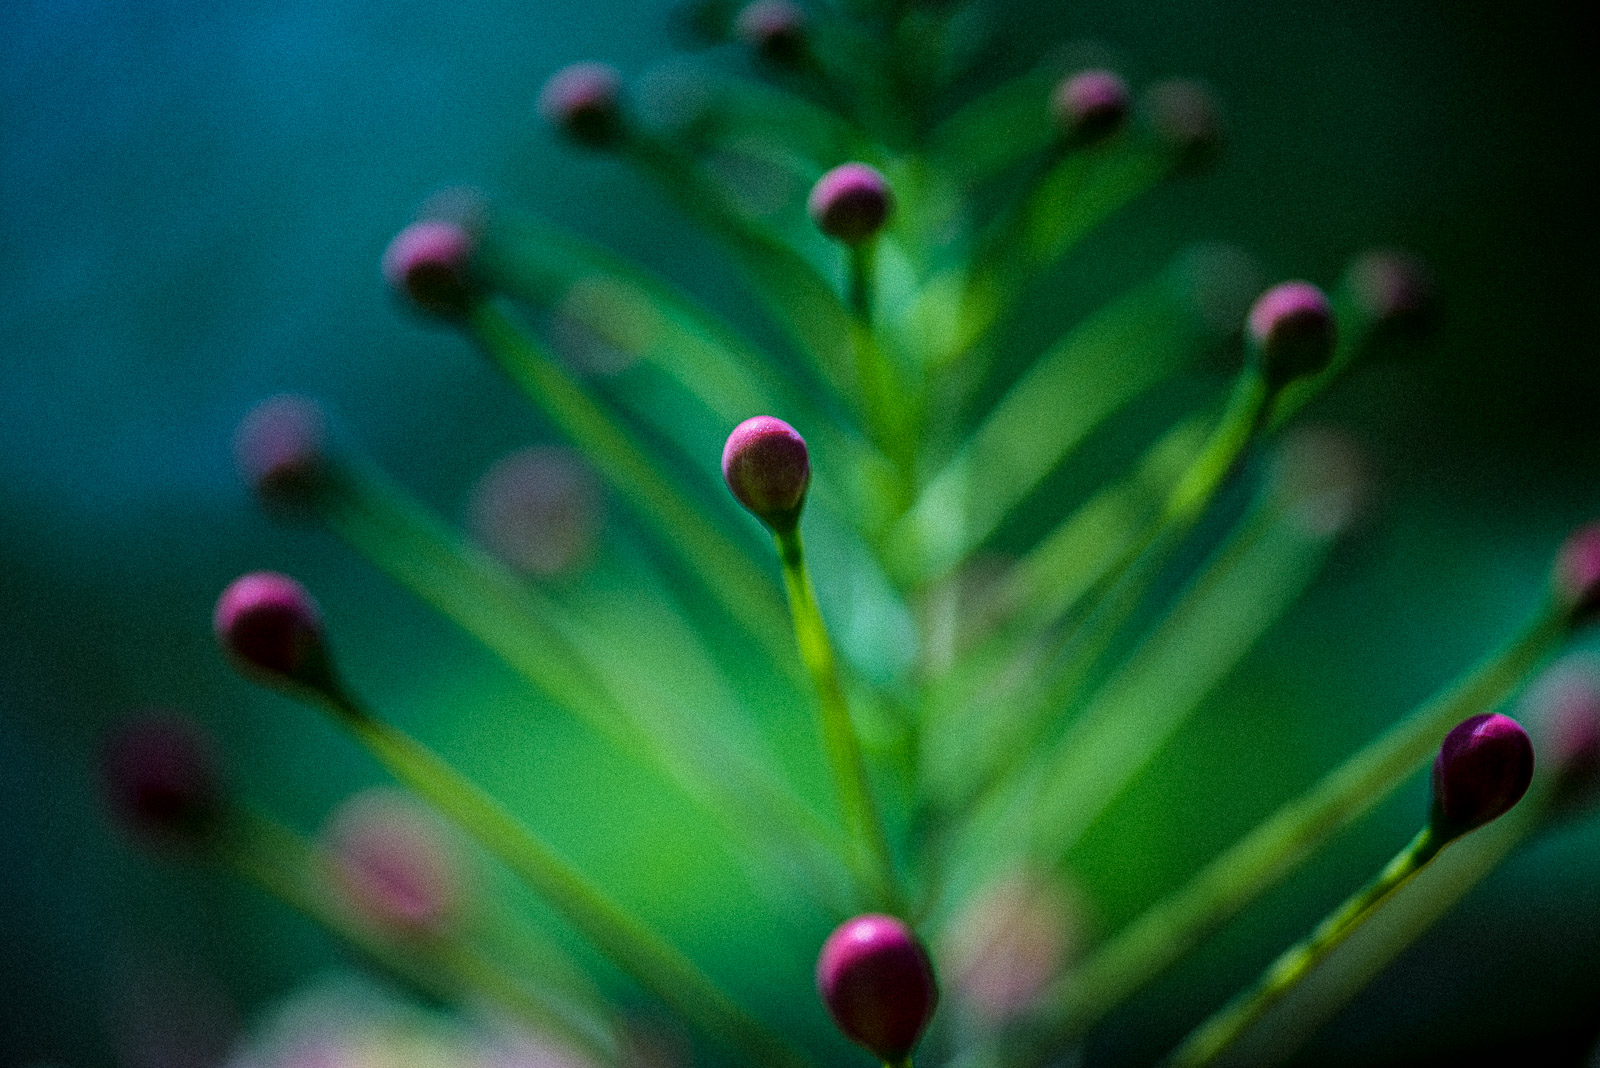 Abstract Stalks and Buds